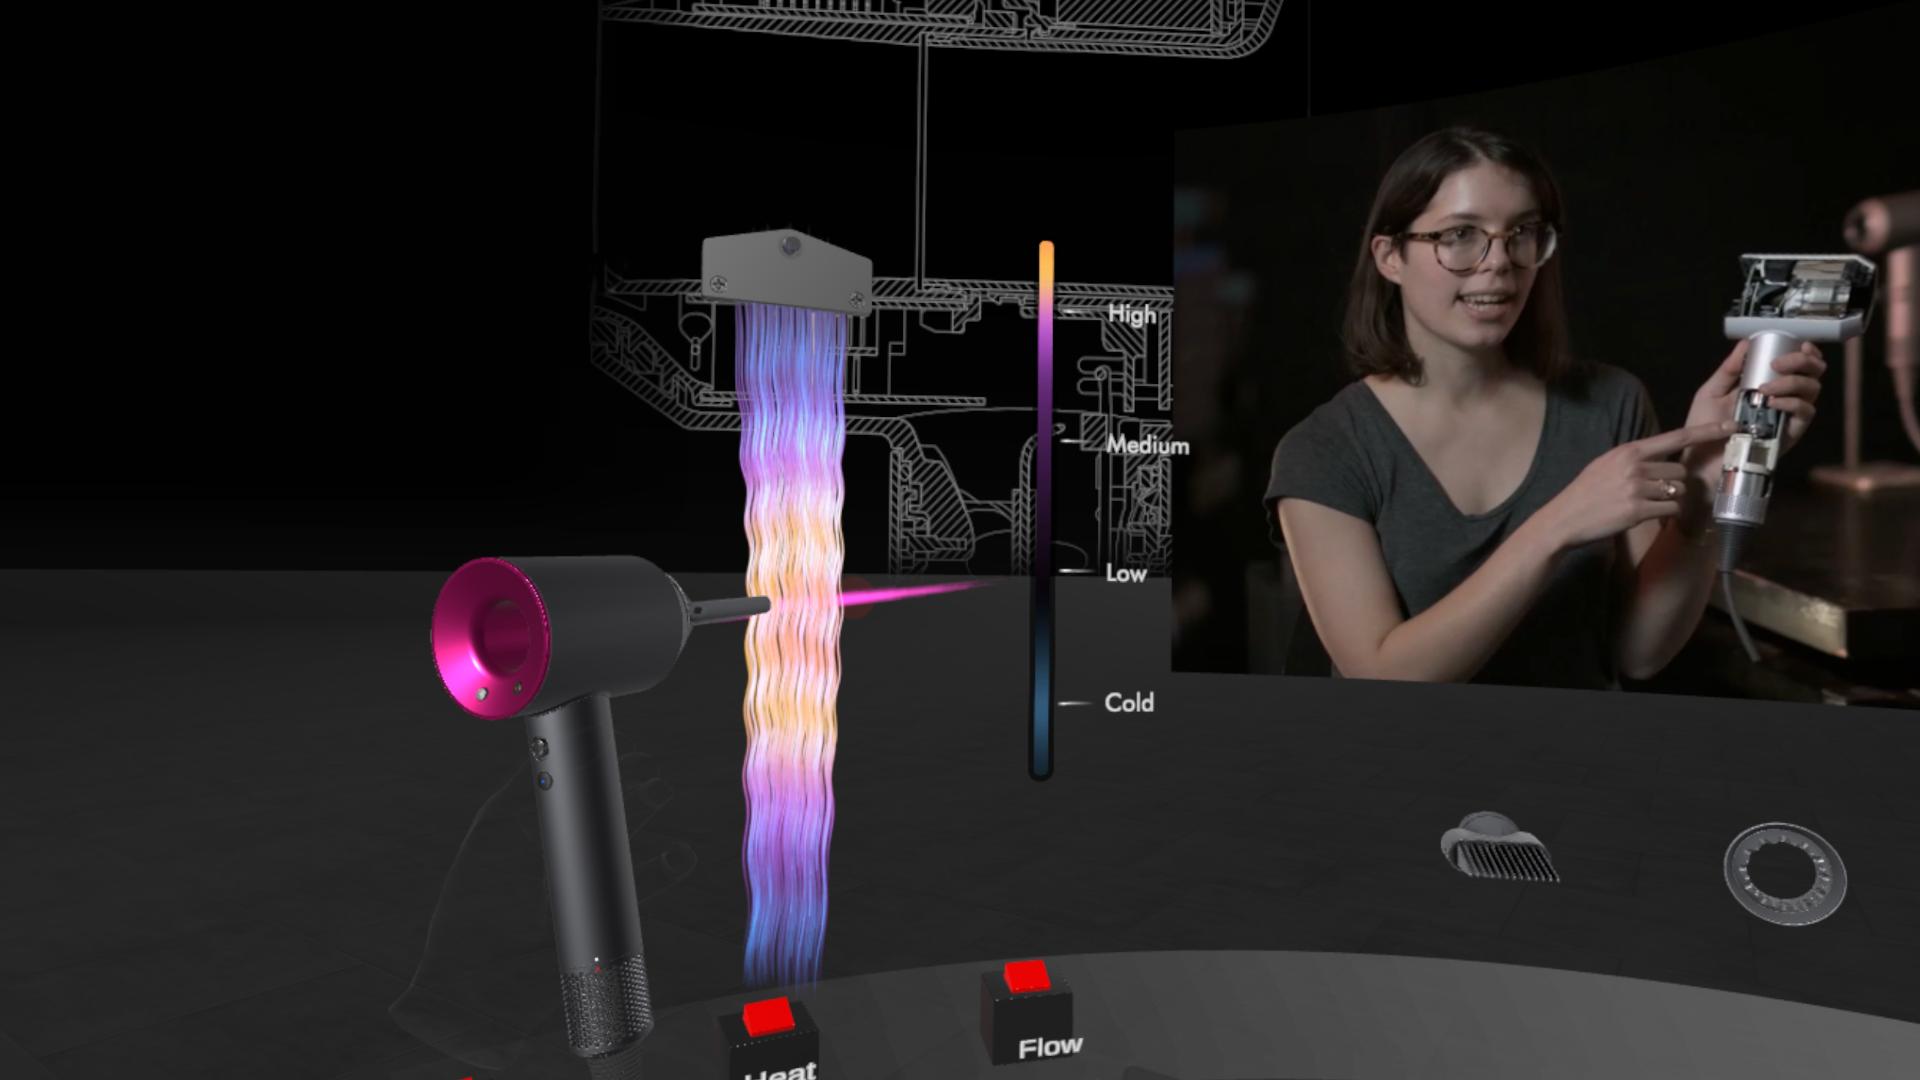 Dyson Supersonic hair dryer in virtual reality, drying virtual hair, while an engineer explains the technology.